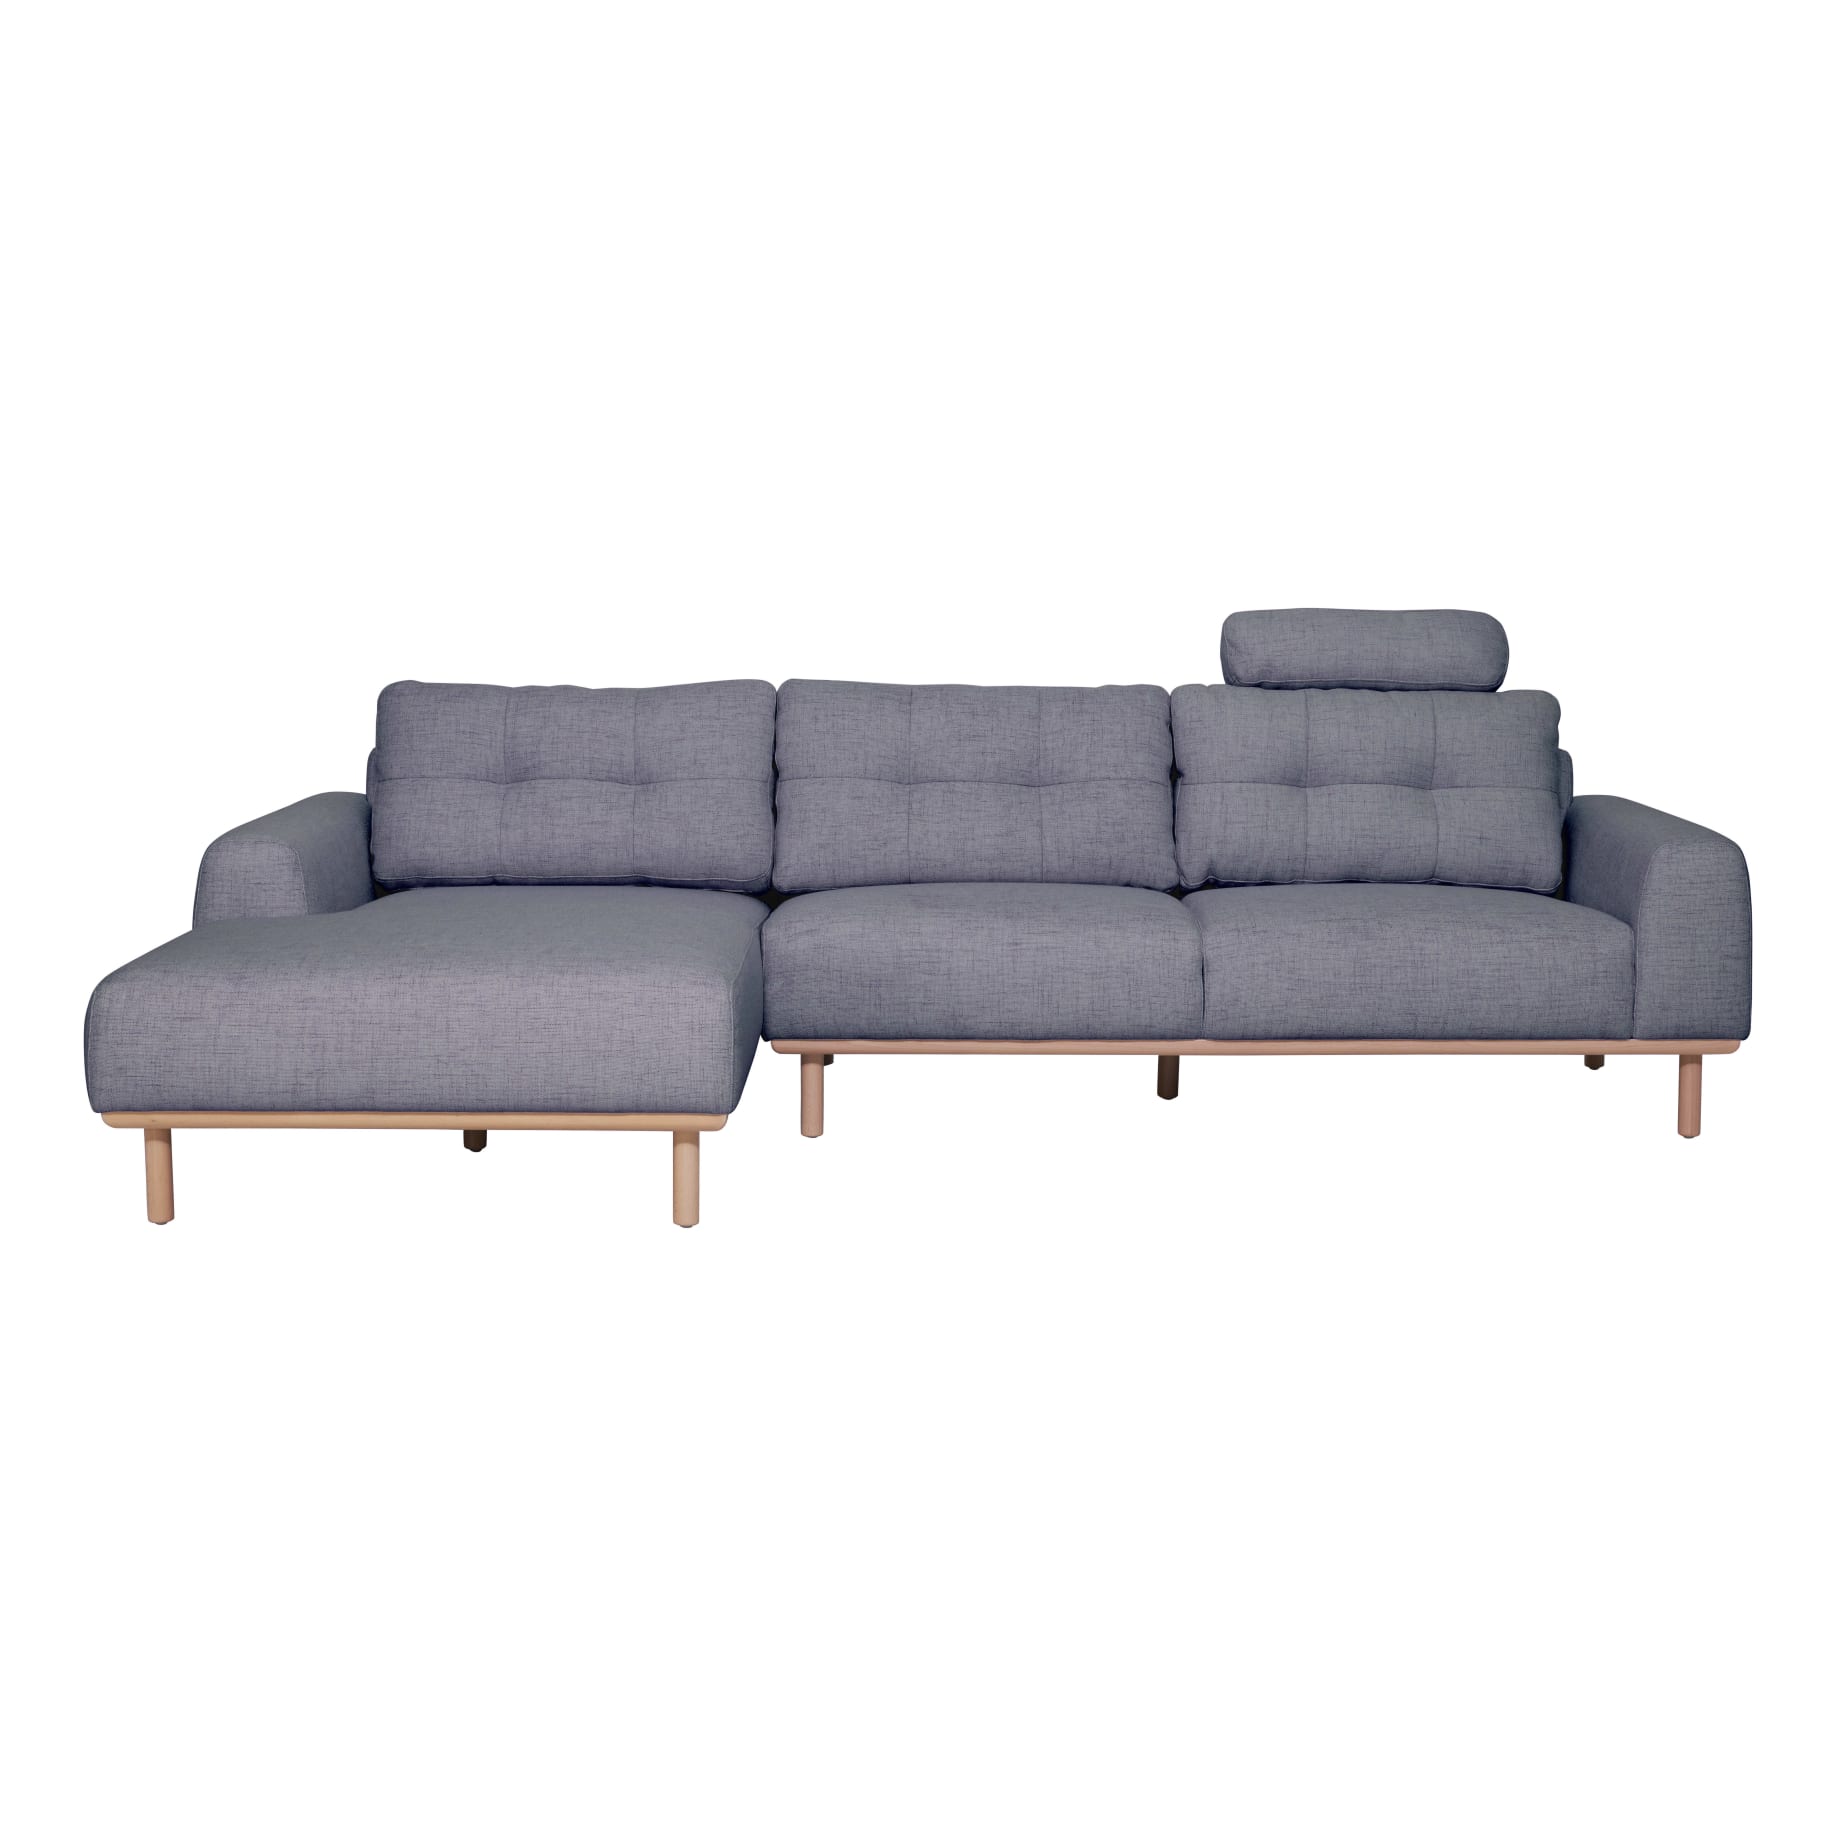 Stratton 3 Seater Sofa + Chaise LHF in Cloud Pewter